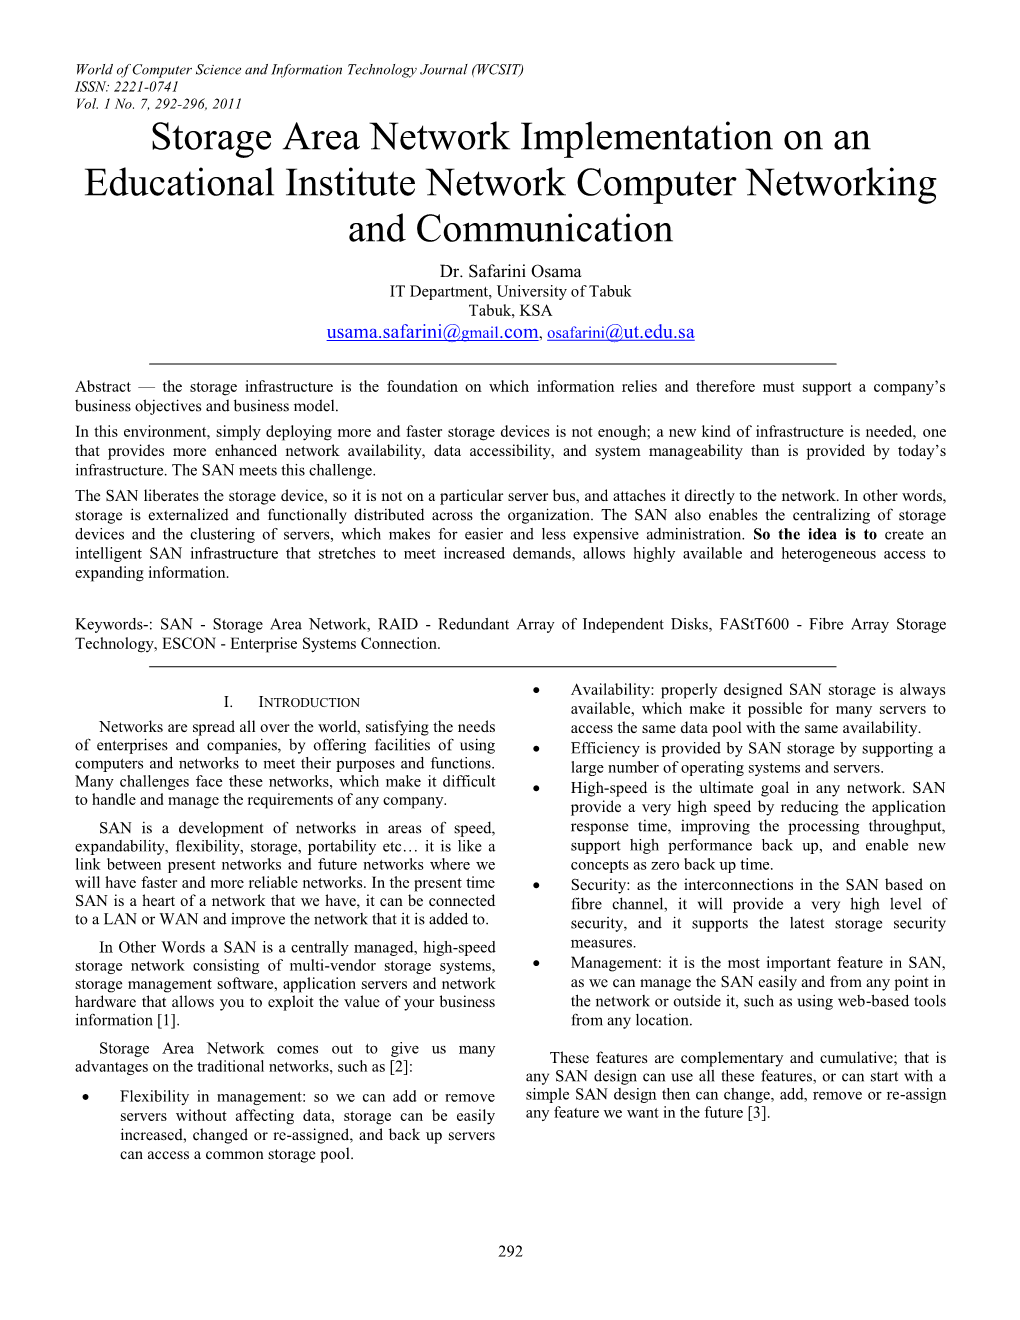 Storage Area Network Implementation on an Educational Institute Network Computer Networking and Communication Dr